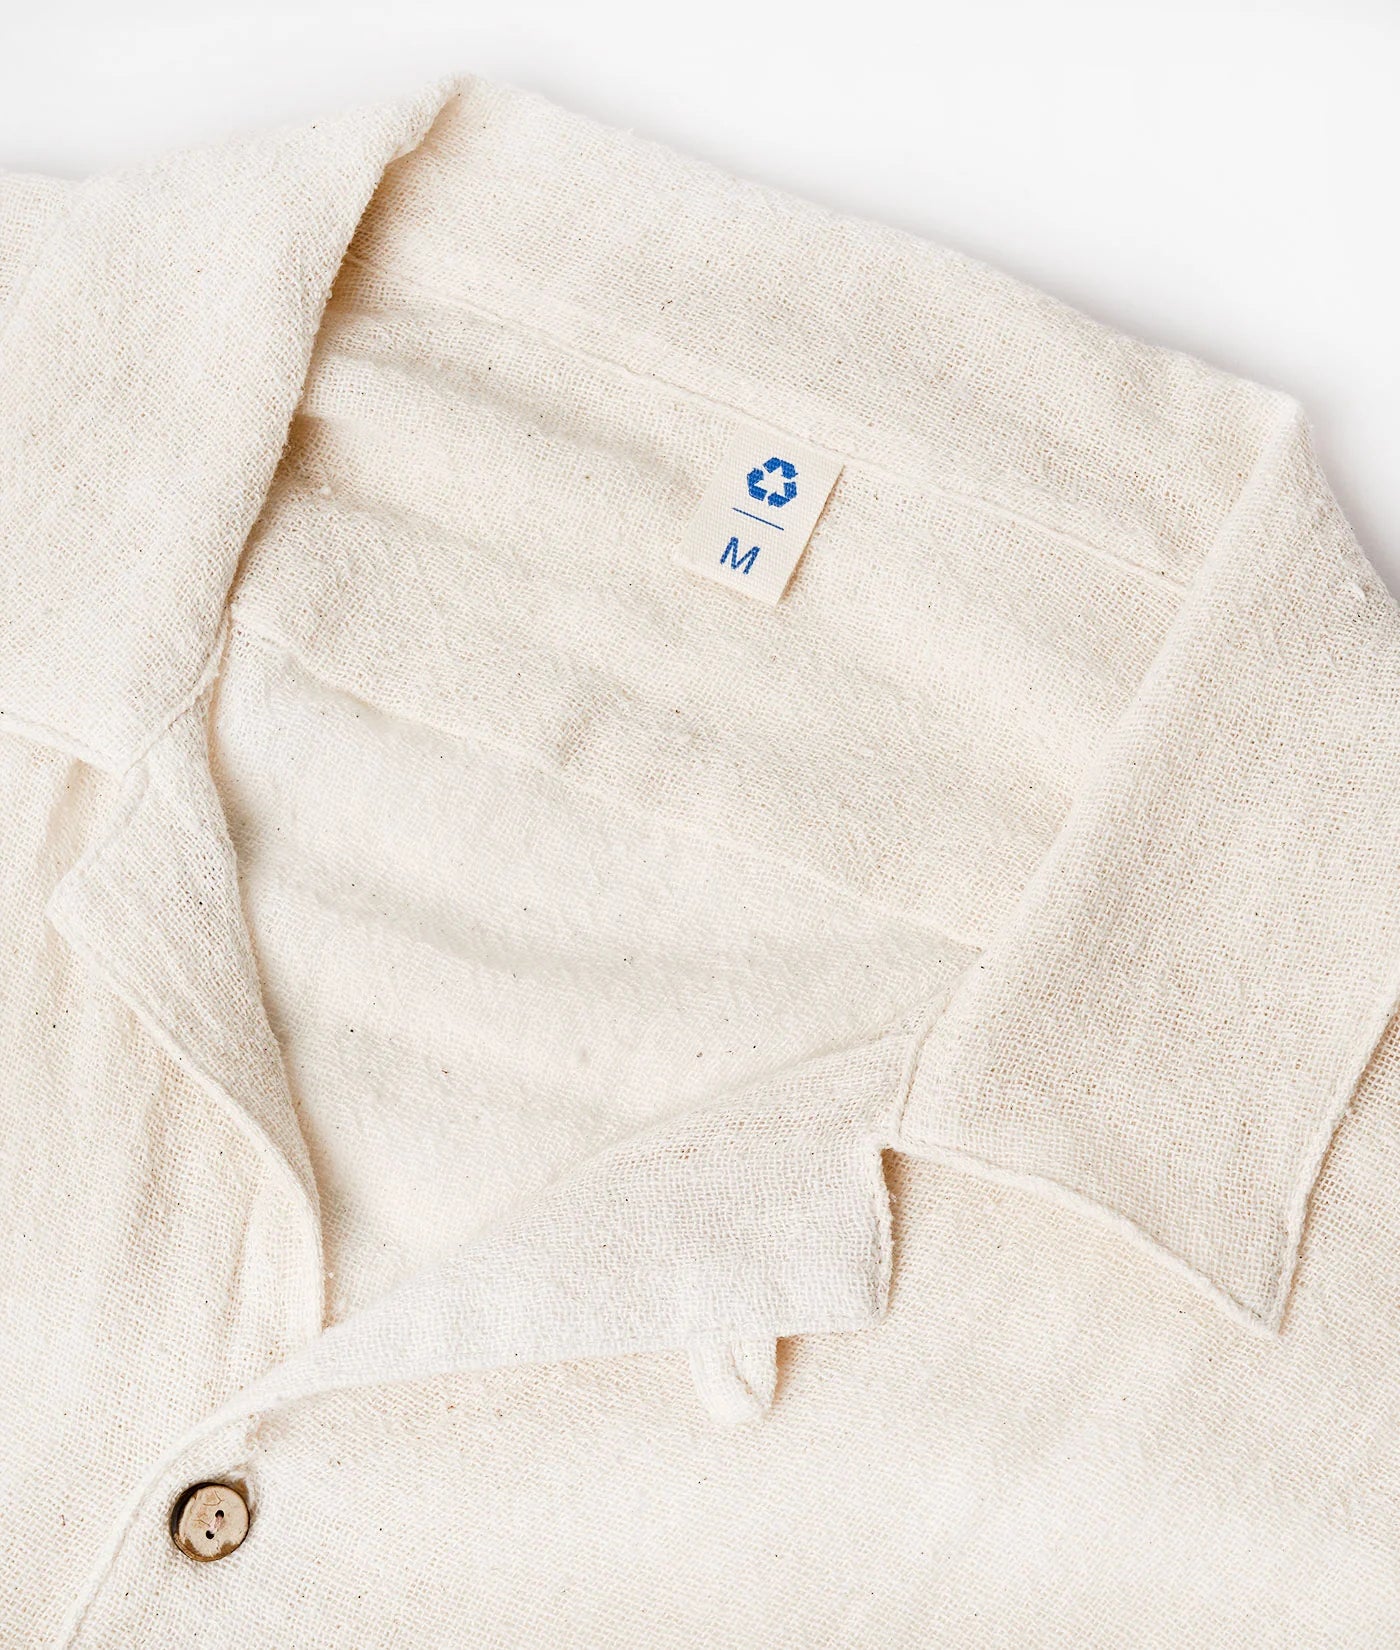 Upcycled Button Down Camp Shirt | Industry of All Nations